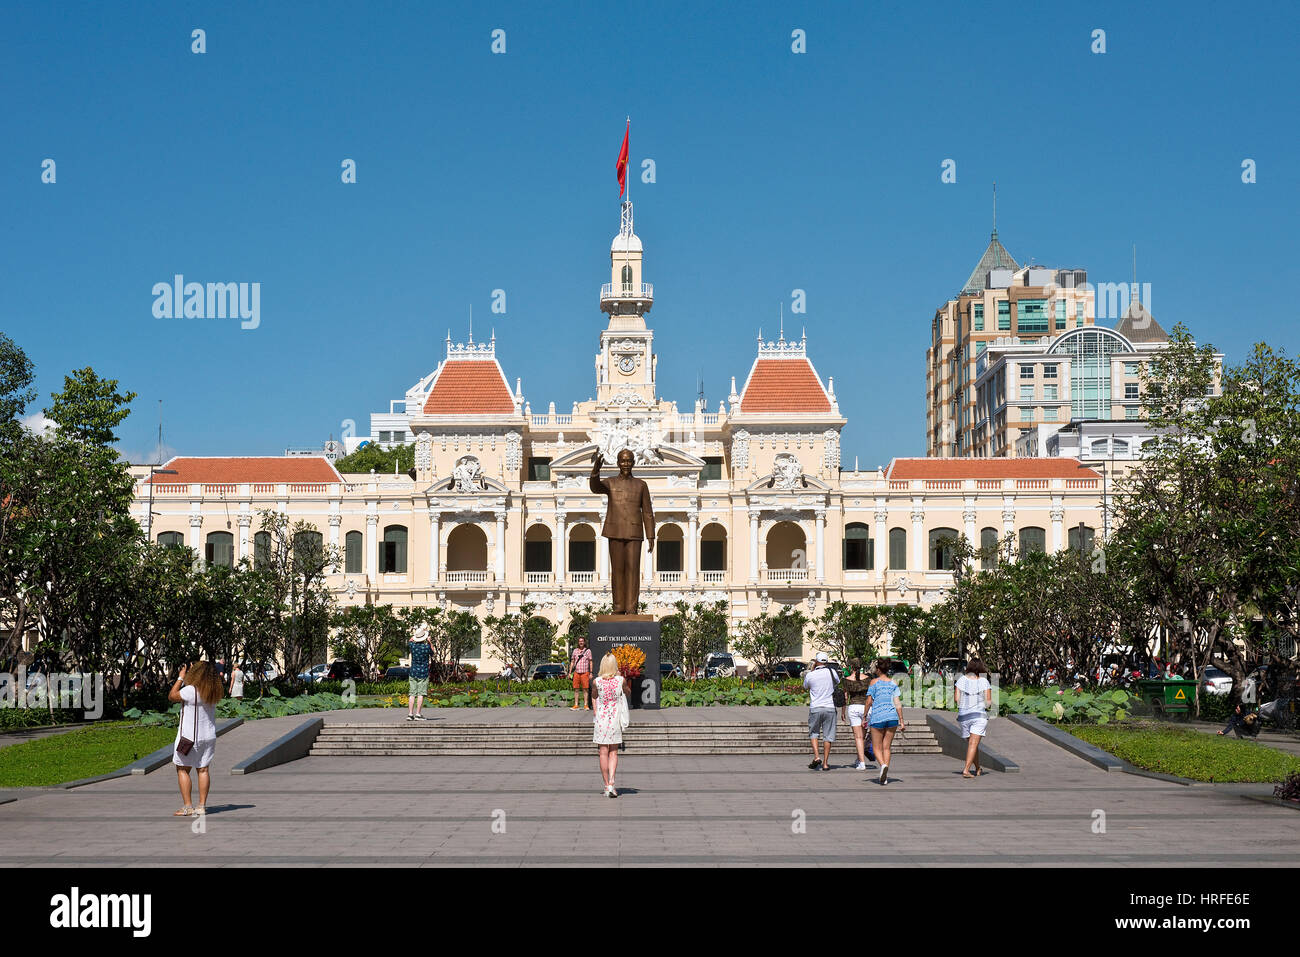 The bronze statue of Ho Chi Minh that stands outside the Ho Chi Minh City Hall on a sunny day with blue sky and tourists taking pictures. Stock Photo